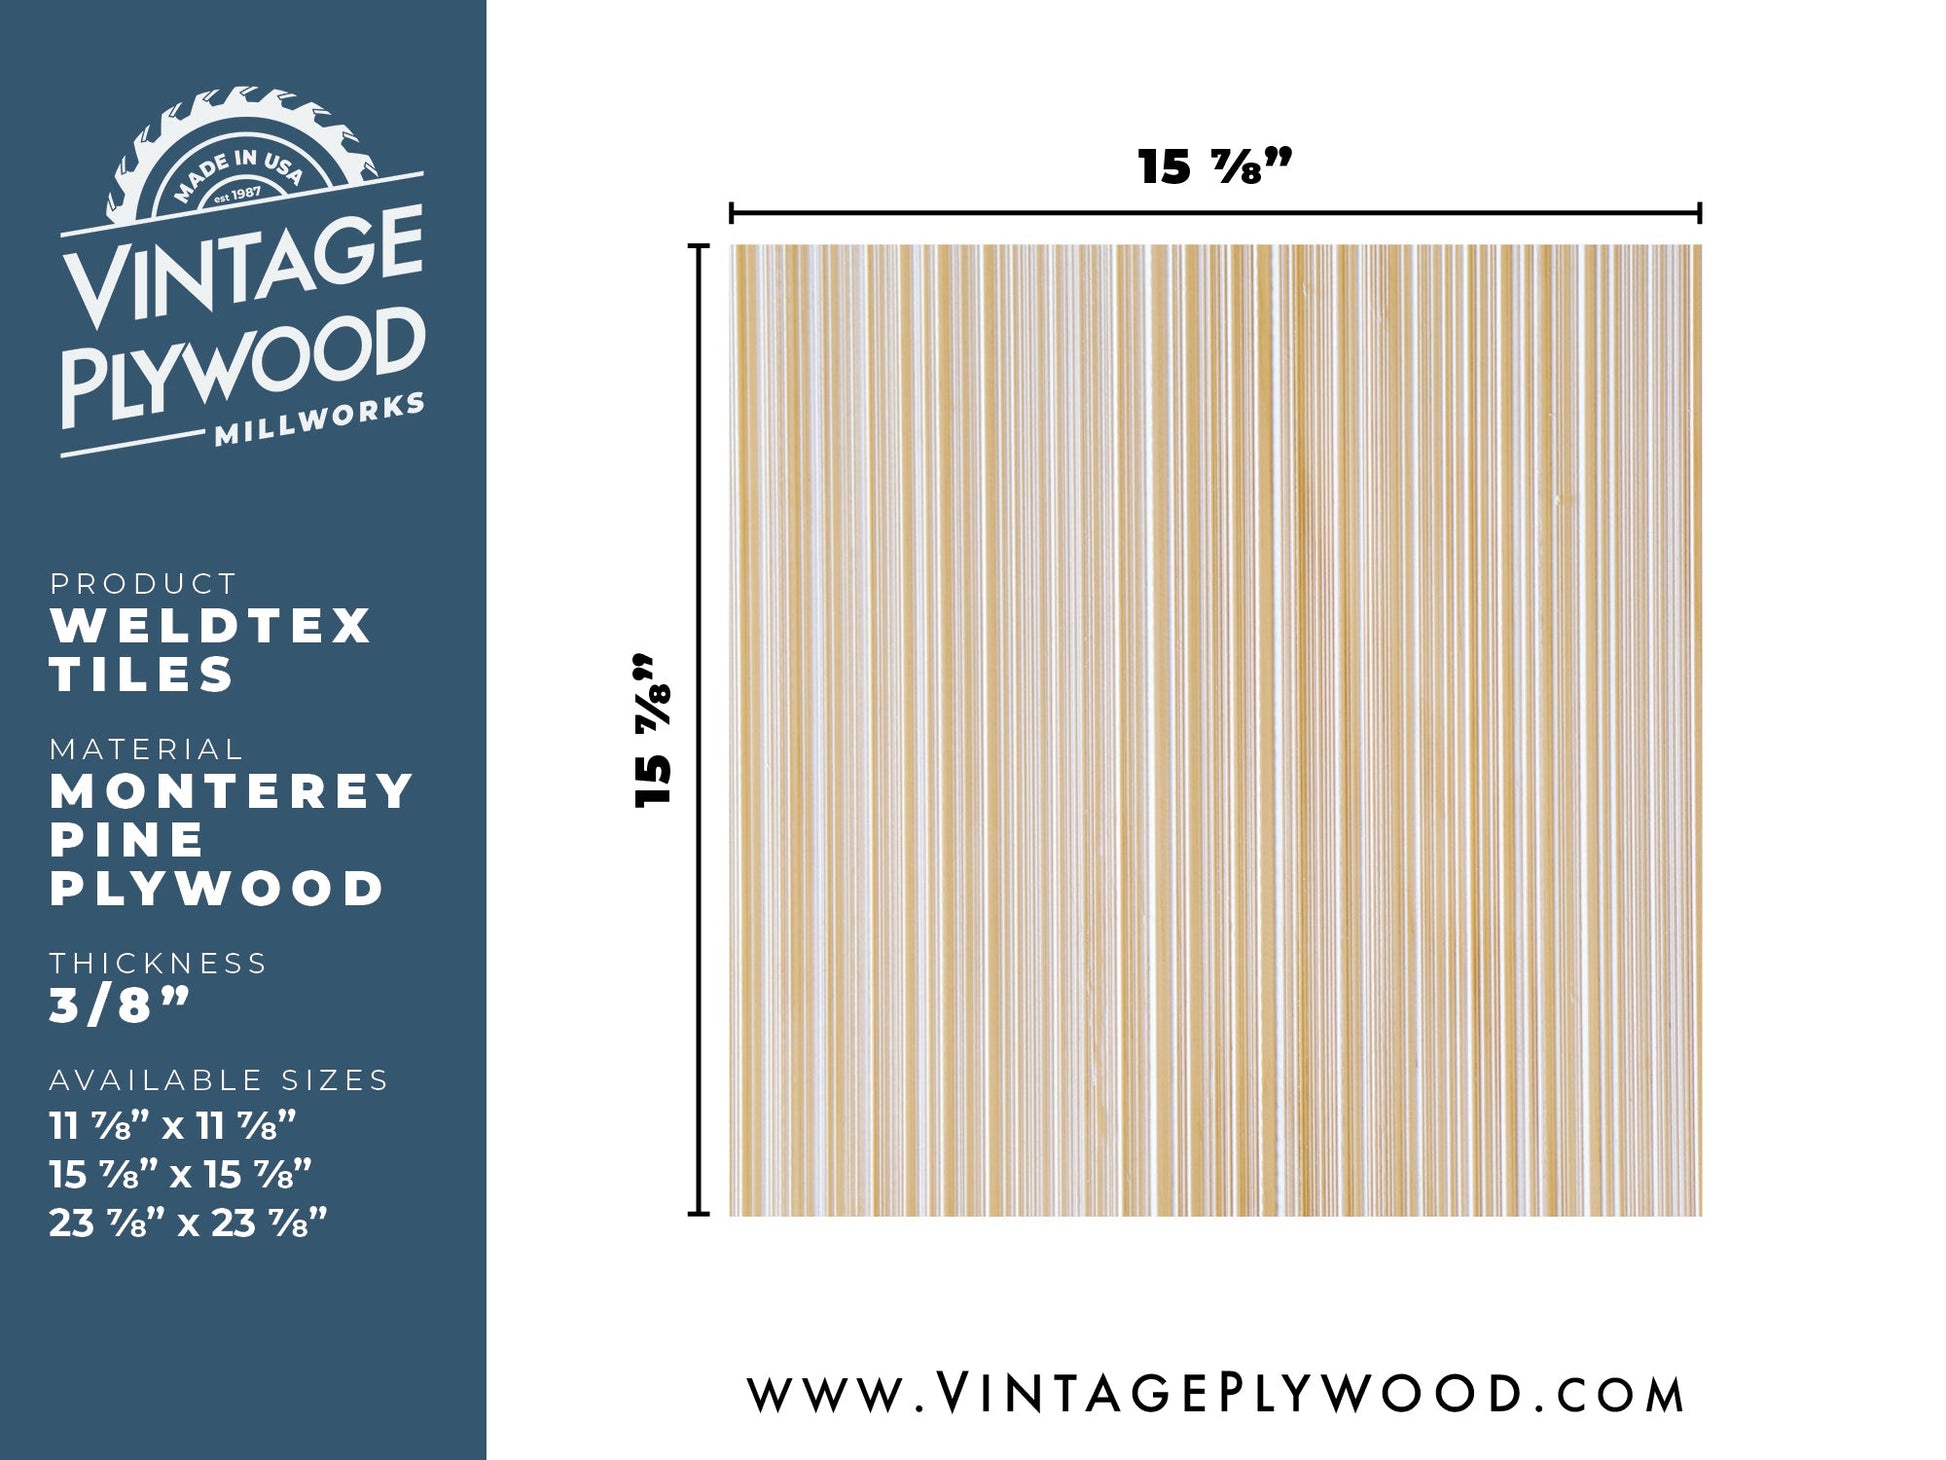 Spec sheet for Weldtex plywood tile consisting of a combed, striated, brushed wood appearance common in mid-century modern homes and design